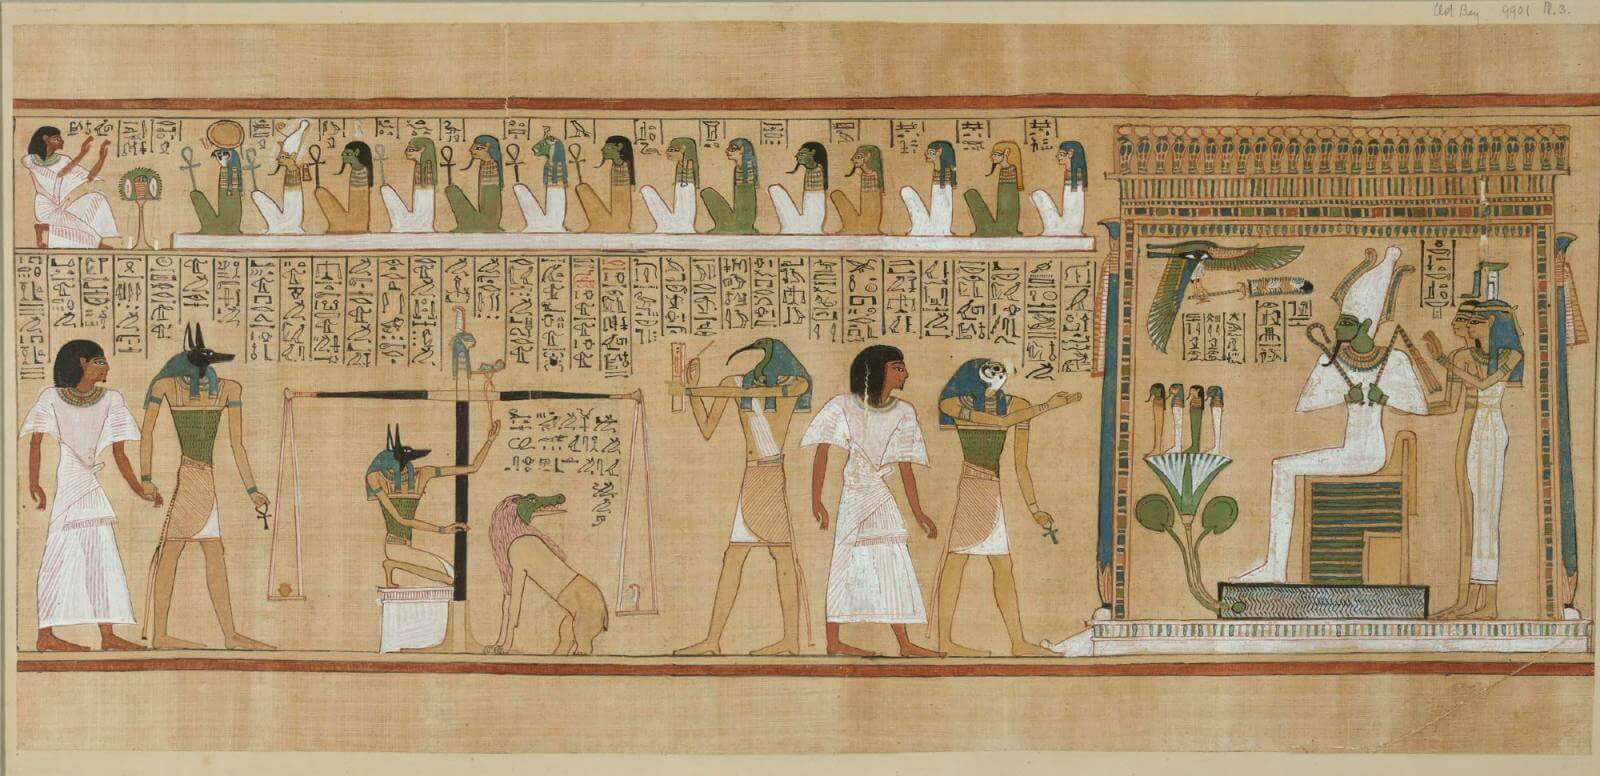 Ancient Egyptian hieroglyphics depicting the supposed journey of the deceased to the afterlife.